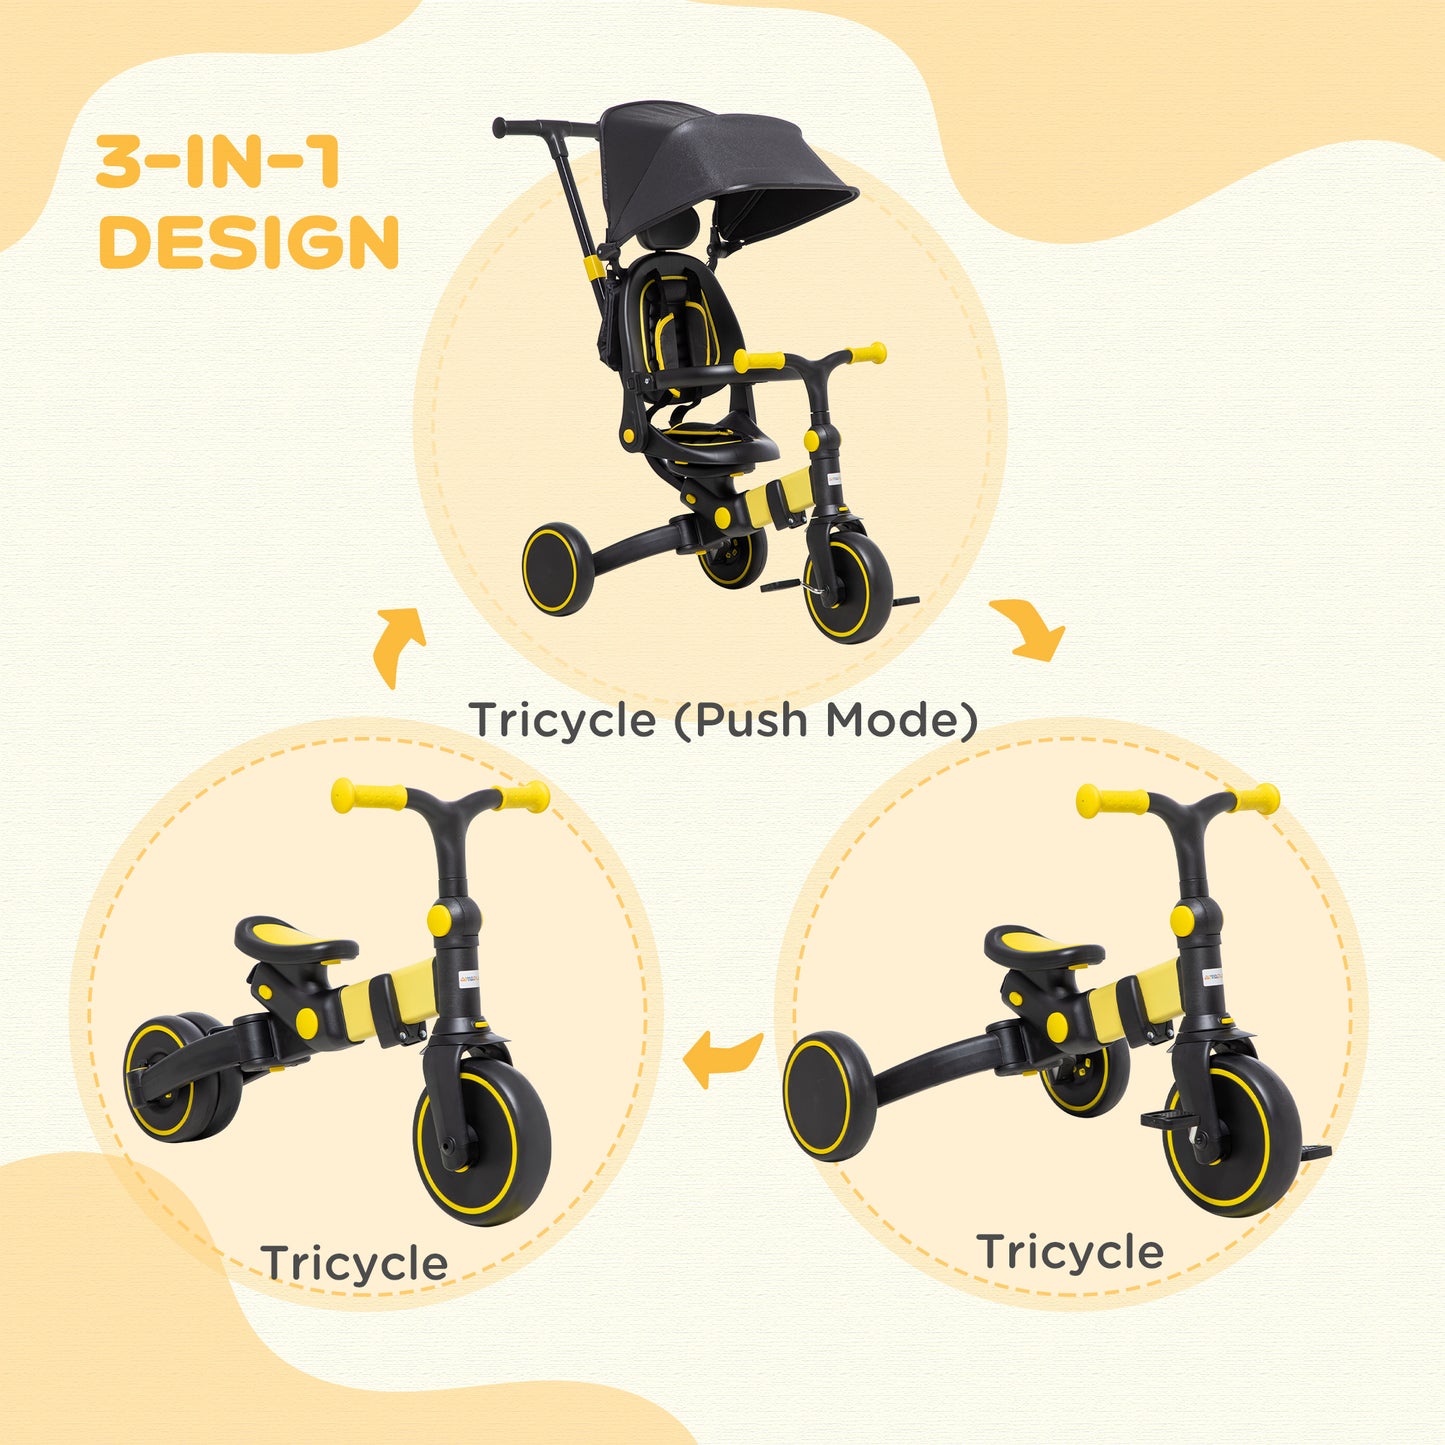 AIYAPLAY 3-in-1 Tricycle for Kids with Aluminium Frame, Baby Trike with Adjustable Push Handle, Canopy and Seat Angle for 18-48 Months, Yellow